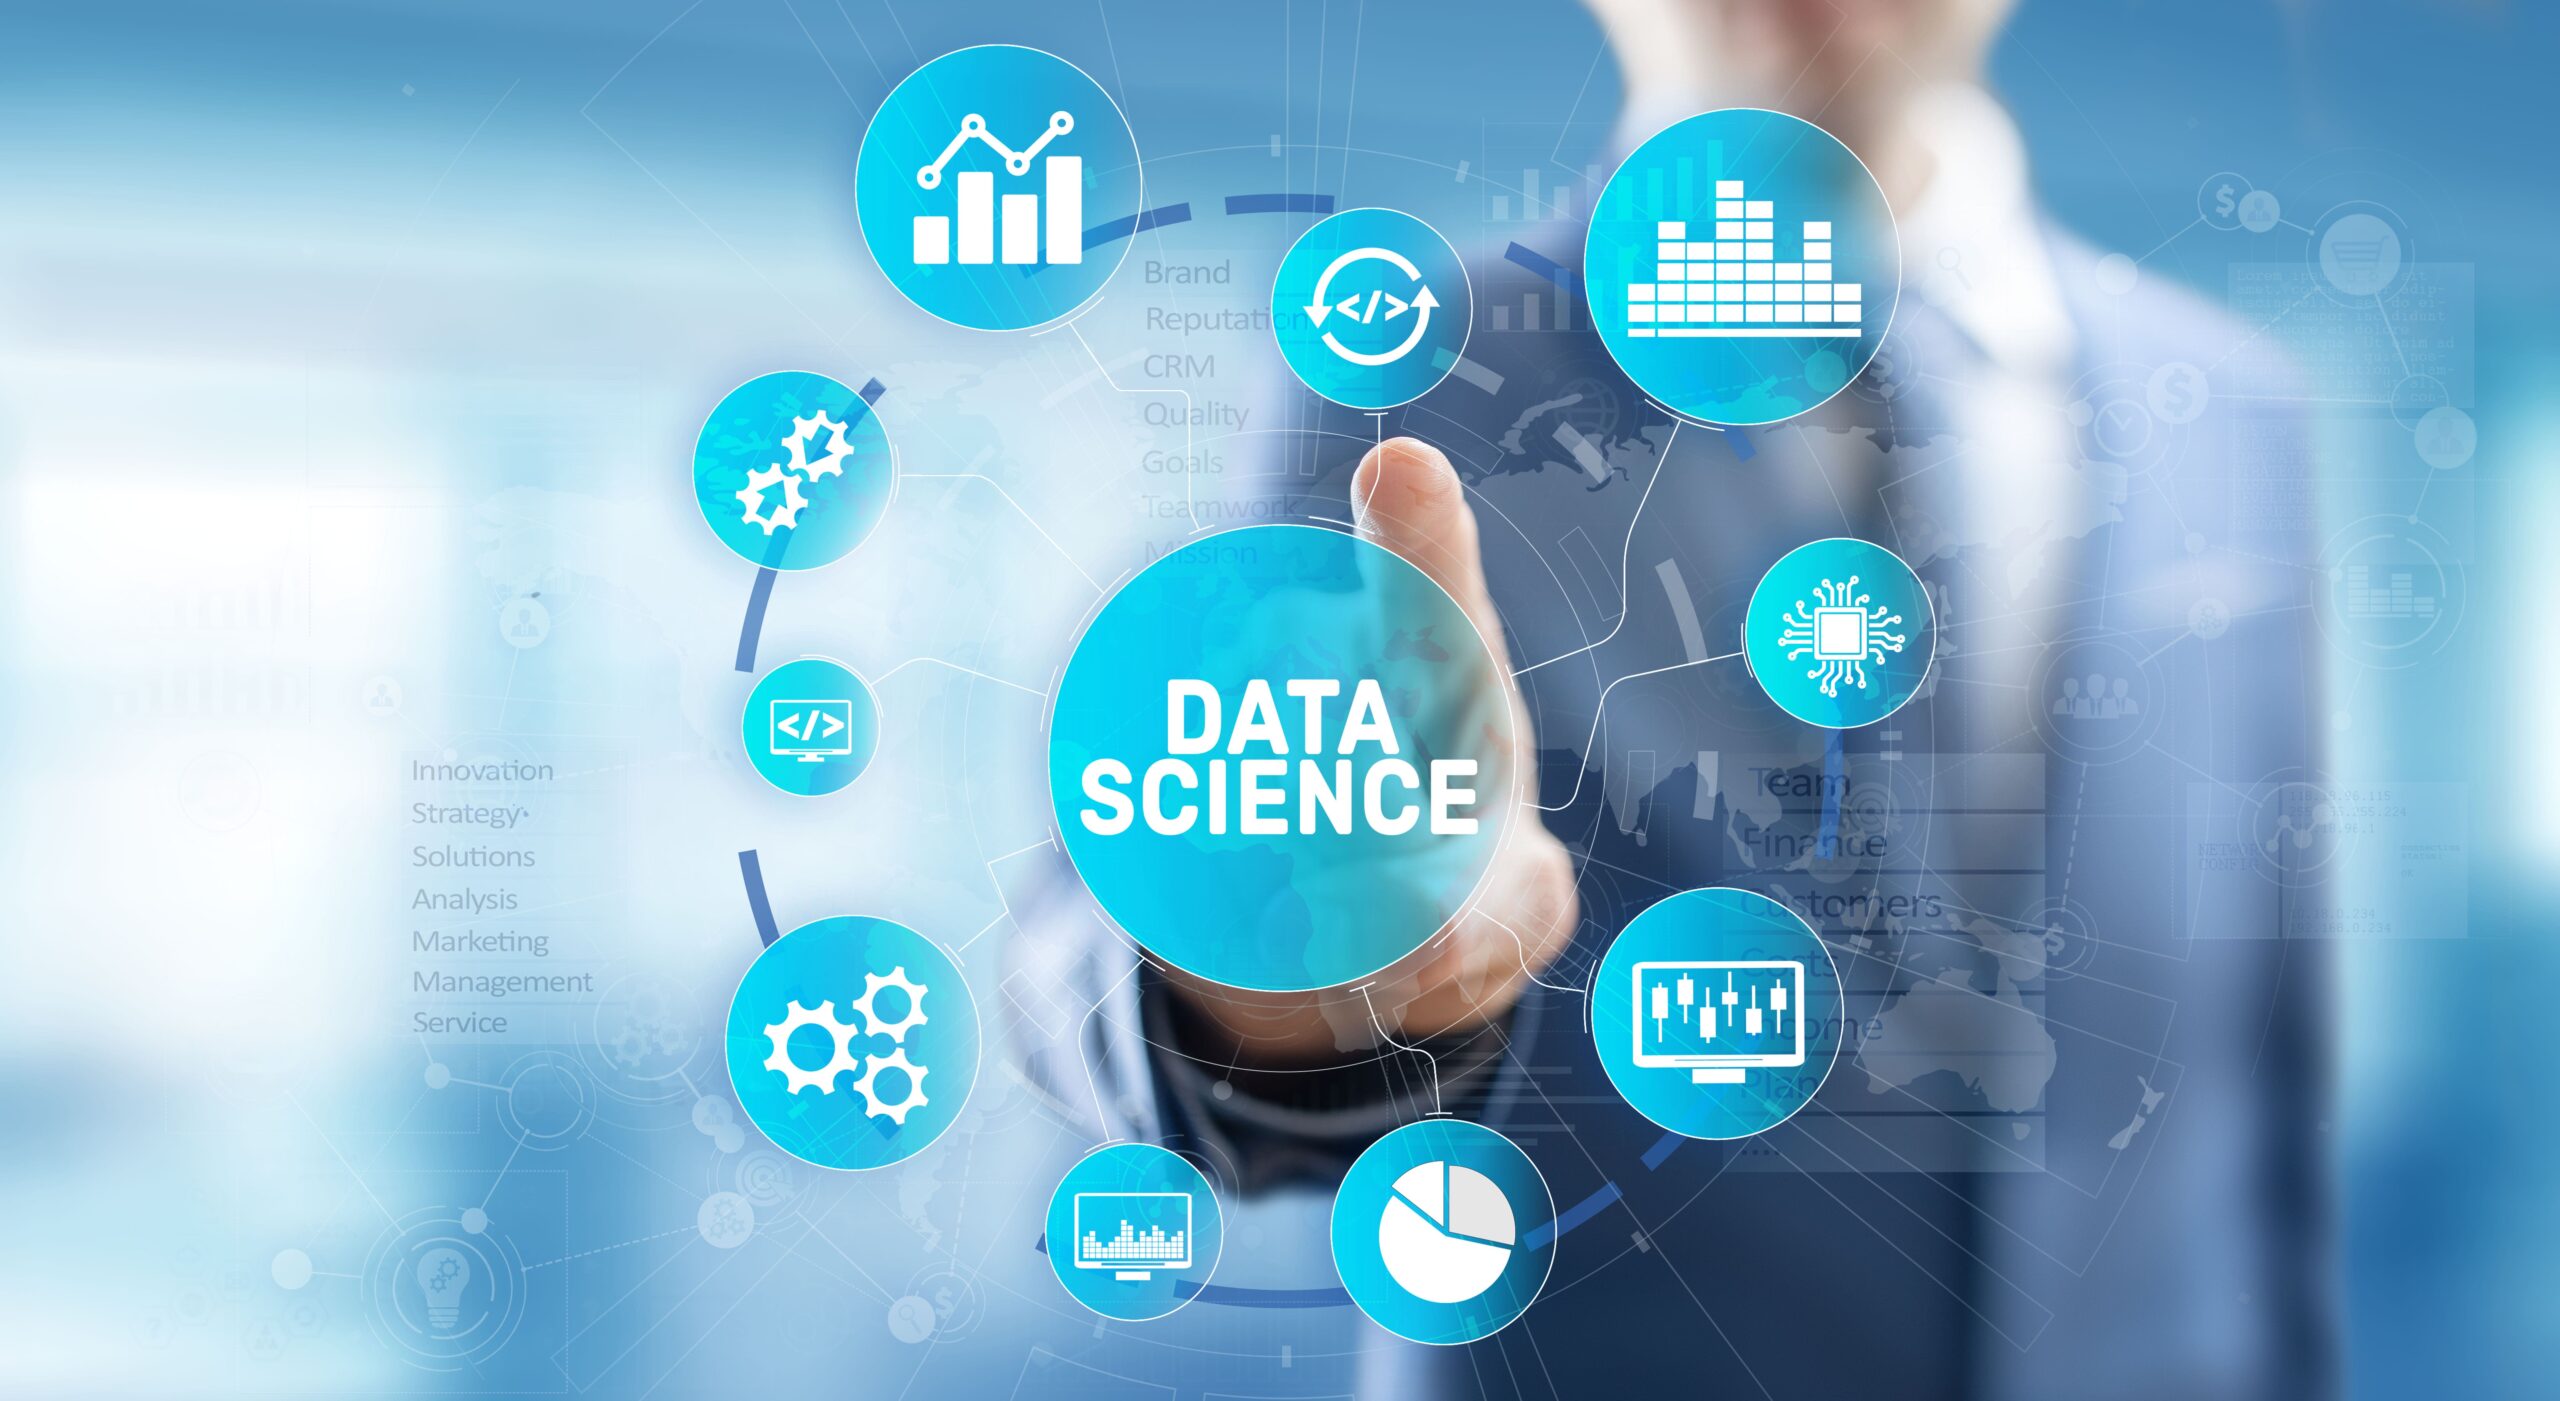 data science graphic image